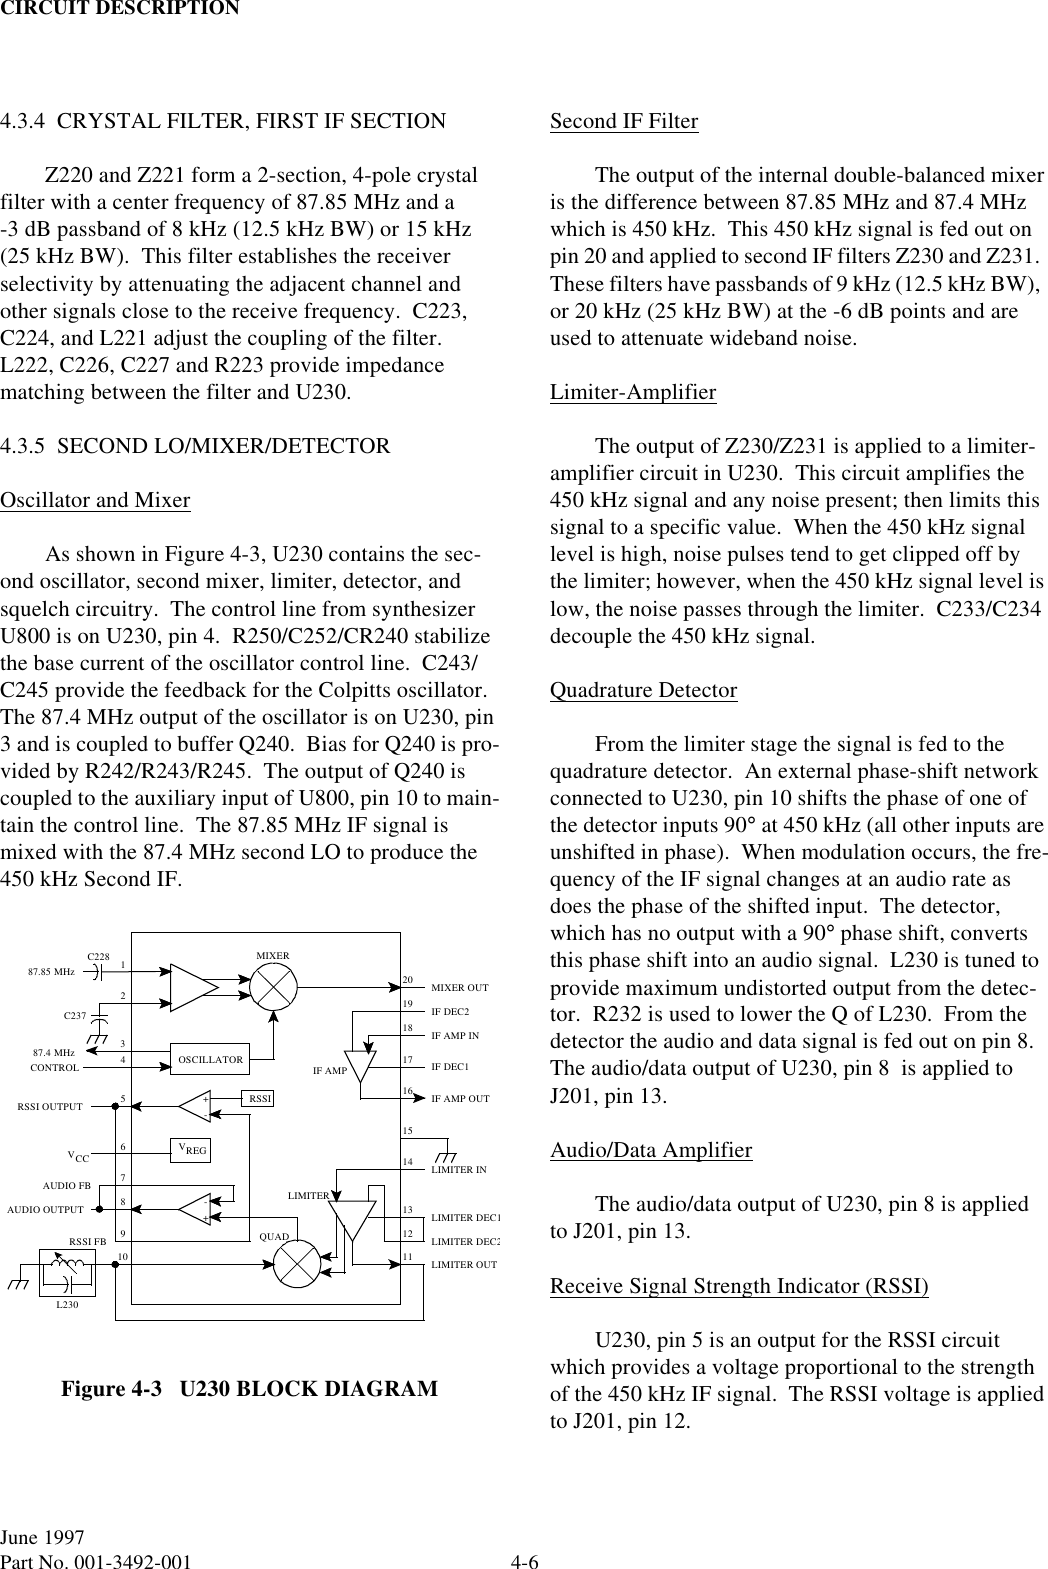 CIRCUIT DESCRIPTION4-6June 1997Part No. 001-3492-0014.3.4  CRYSTAL FILTER, FIRST IF SECTIONZ220 and Z221 form a 2-section, 4-pole crystal filter with a center frequency of 87.85 MHz and a -3 dB passband of 8 kHz (12.5 kHz BW) or 15 kHz (25 kHz BW).  This filter establishes the receiver selectivity by attenuating the adjacent channel and other signals close to the receive frequency.  C223, C224, and L221 adjust the coupling of the filter.  L222, C226, C227 and R223 provide impedance matching between the filter and U230.4.3.5  SECOND LO/MIXER/DETECTOROscillator and MixerAs shown in Figure 4-3, U230 contains the sec-ond oscillator, second mixer, limiter, detector, and squelch circuitry.  The control line from synthesizer U800 is on U230, pin 4.  R250/C252/CR240 stabilize the base current of the oscillator control line.  C243/C245 provide the feedback for the Colpitts oscillator.  The 87.4 MHz output of the oscillator is on U230, pin 3 and is coupled to buffer Q240.  Bias for Q240 is pro-vided by R242/R243/R245.  The output of Q240 is coupled to the auxiliary input of U800, pin 10 to main-tain the control line.  The 87.85 MHz IF signal is mixed with the 87.4 MHz second LO to produce the 450 kHz Second IF.Figure 4-3   U230 BLOCK DIAGRAMSecond IF FilterThe output of the internal double-balanced mixer is the difference between 87.85 MHz and 87.4 MHz which is 450 kHz.  This 450 kHz signal is fed out on pin 20 and applied to second IF filters Z230 and Z231.  These filters have passbands of 9 kHz (12.5 kHz BW),  or 20 kHz (25 kHz BW) at the -6 dB points and are used to attenuate wideband noise.Limiter-AmplifierThe output of Z230/Z231 is applied to a limiter-amplifier circuit in U230.  This circuit amplifies the 450 kHz signal and any noise present; then limits this signal to a specific value.  When the 450 kHz signal level is high, noise pulses tend to get clipped off by the limiter; however, when the 450 kHz signal level is low, the noise passes through the limiter.  C233/C234 decouple the 450 kHz signal.Quadrature DetectorFrom the limiter stage the signal is fed to the quadrature detector.  An external phase-shift network connected to U230, pin 10 shifts the phase of one of the detector inputs 90° at 450 kHz (all other inputs are unshifted in phase).  When modulation occurs, the fre-quency of the IF signal changes at an audio rate as does the phase of the shifted input.  The detector, which has no output with a 90° phase shift, converts this phase shift into an audio signal.  L230 is tuned to provide maximum undistorted output from the detec-tor.  R232 is used to lower the Q of L230.  From the detector the audio and data signal is fed out on pin 8.  The audio/data output of U230, pin 8  is applied to J201, pin 13.Audio/Data AmplifierThe audio/data output of U230, pin 8 is applied to J201, pin 13.Receive Signal Strength Indicator (RSSI)U230, pin 5 is an output for the RSSI circuit which provides a voltage proportional to the strength of the 450 kHz IF signal.  The RSSI voltage is applied to J201, pin 12.124MIXER5151411RSSI87.85 MHzC228C23720OSCILLATOR87.4 MHz+-RSSI OUTPUT9VREG6VCC78+-10QUADAUDIO OUTPUTL23012133CONTROLLIMITER INLIMITERIF AMP OUTIF DEC1IF DEC2IF AMP INMIXER OUTLIMITER DEC1LIMITER DEC2LIMITER OUTIF AMP16171819RSSI FBAUDIO FB